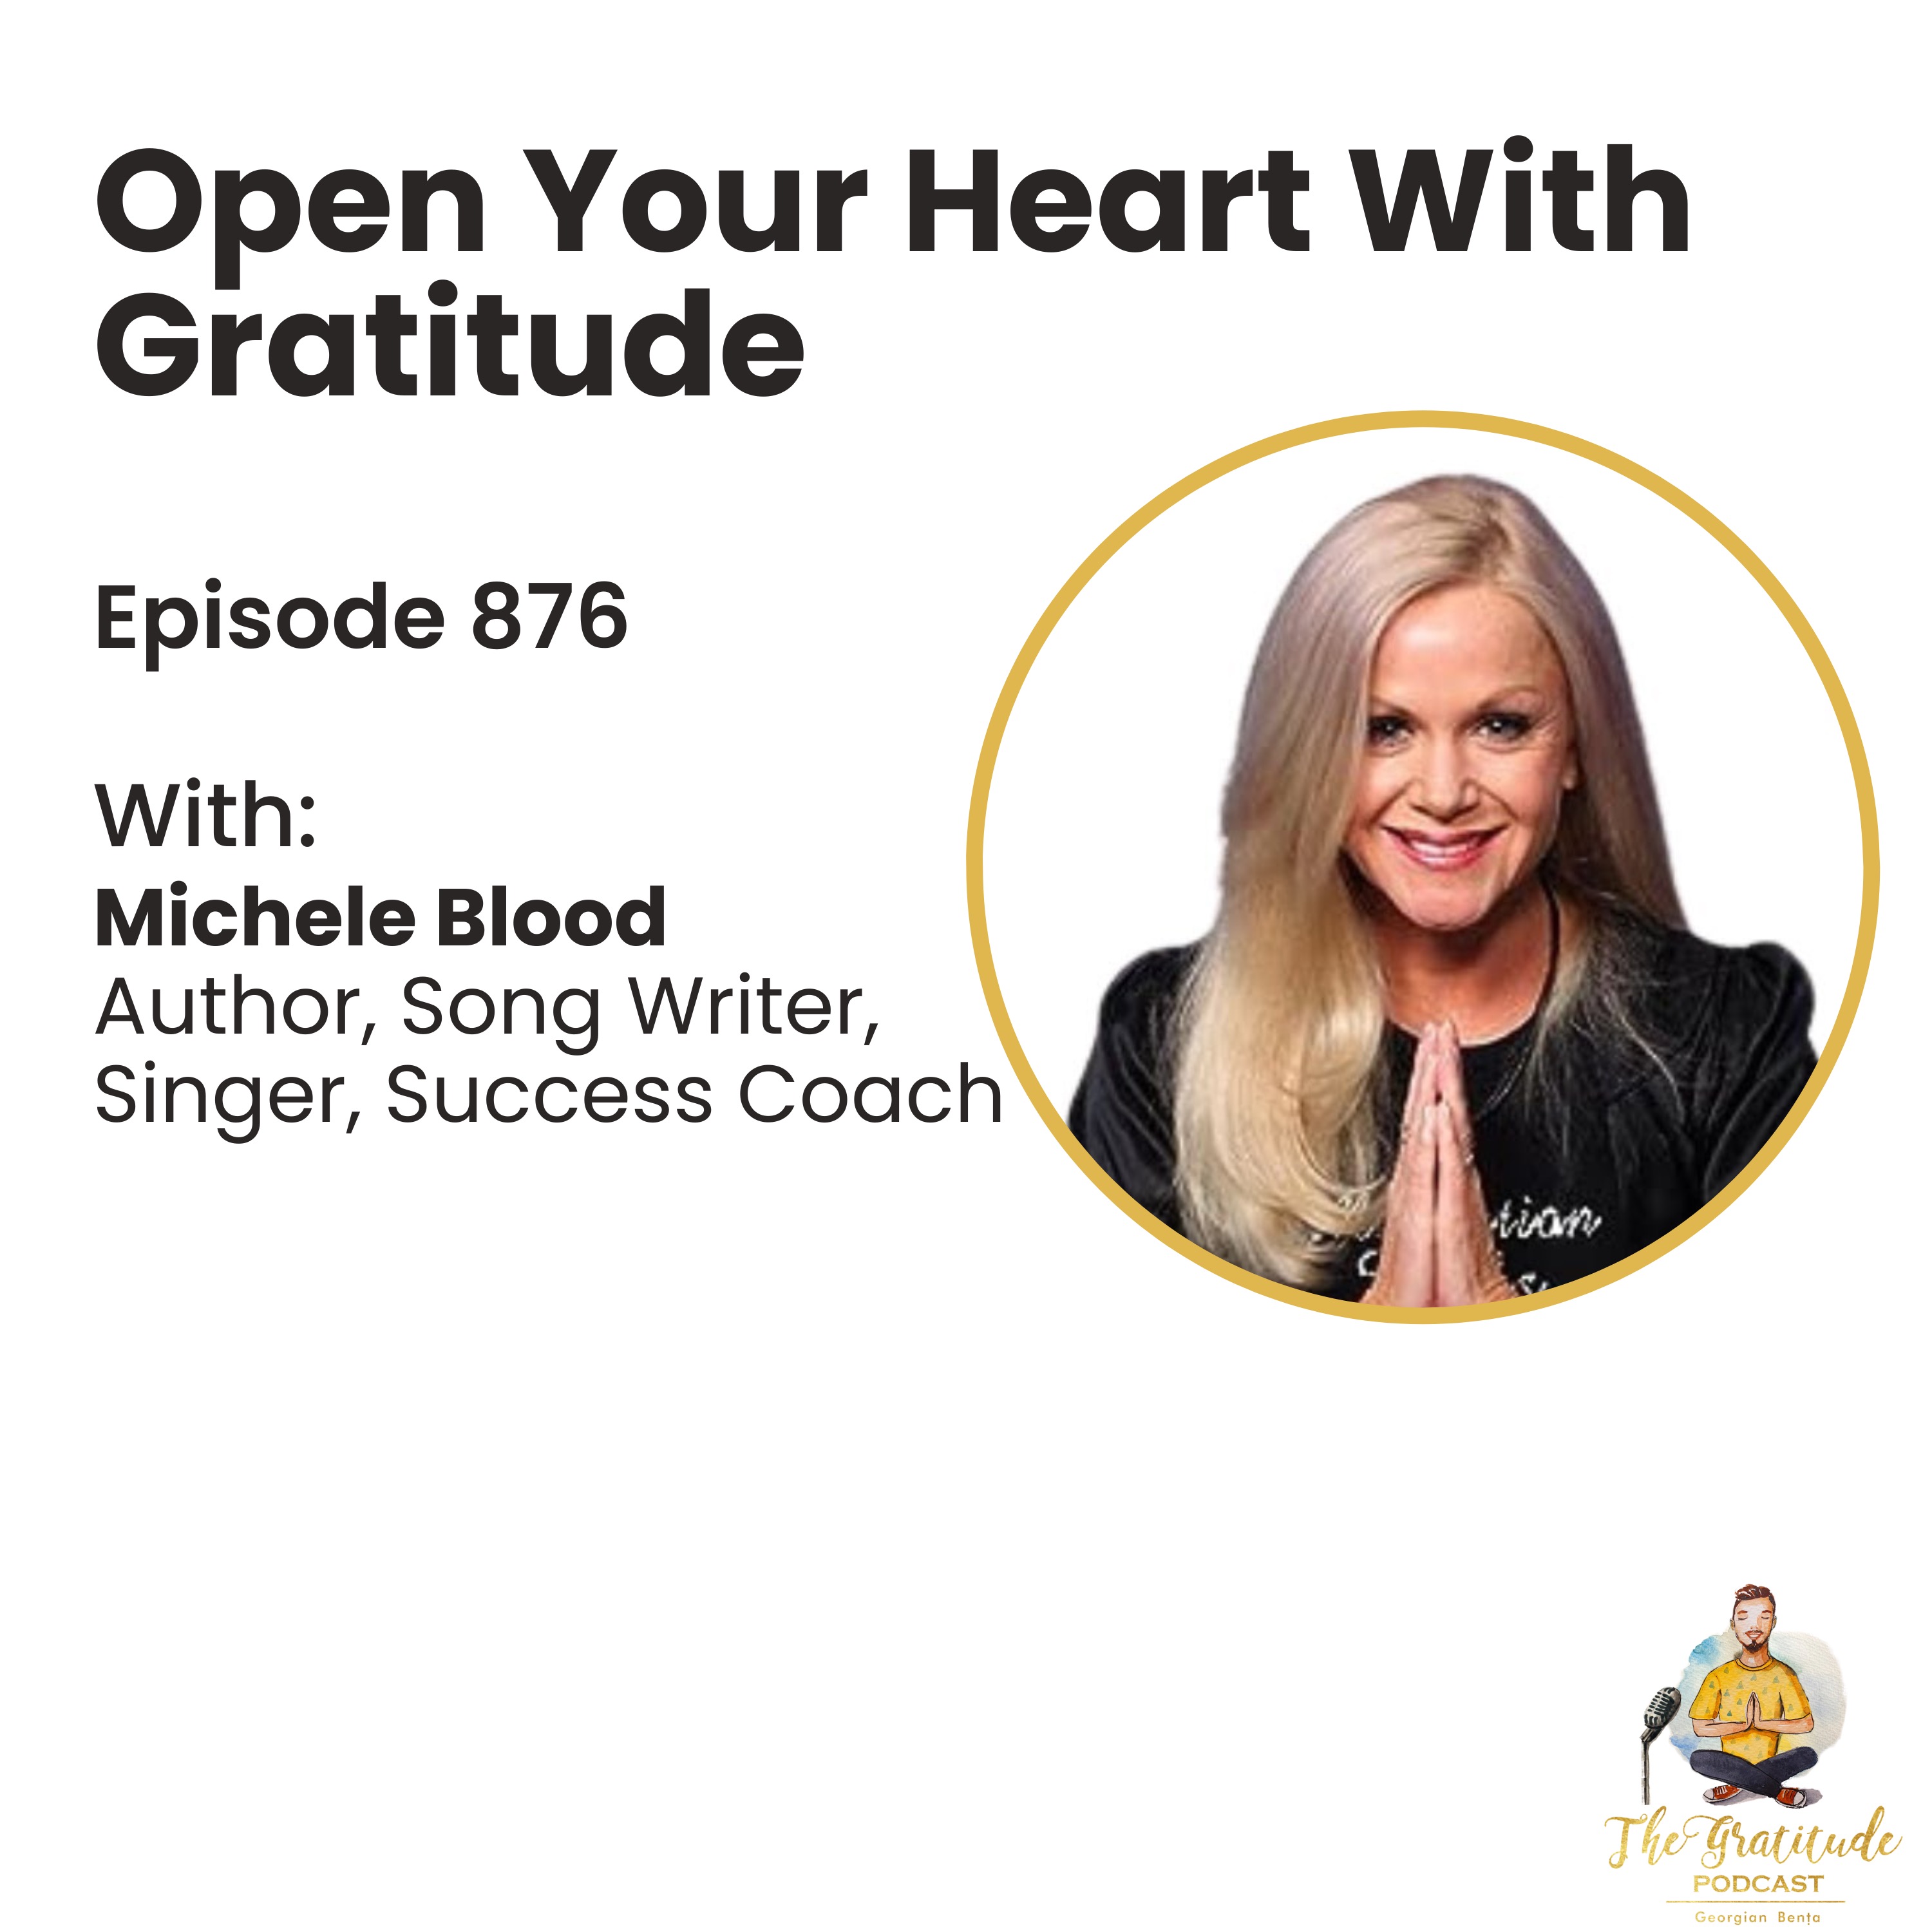 Open Your Heart With Gratitude - Michele Blood (ep. 876)